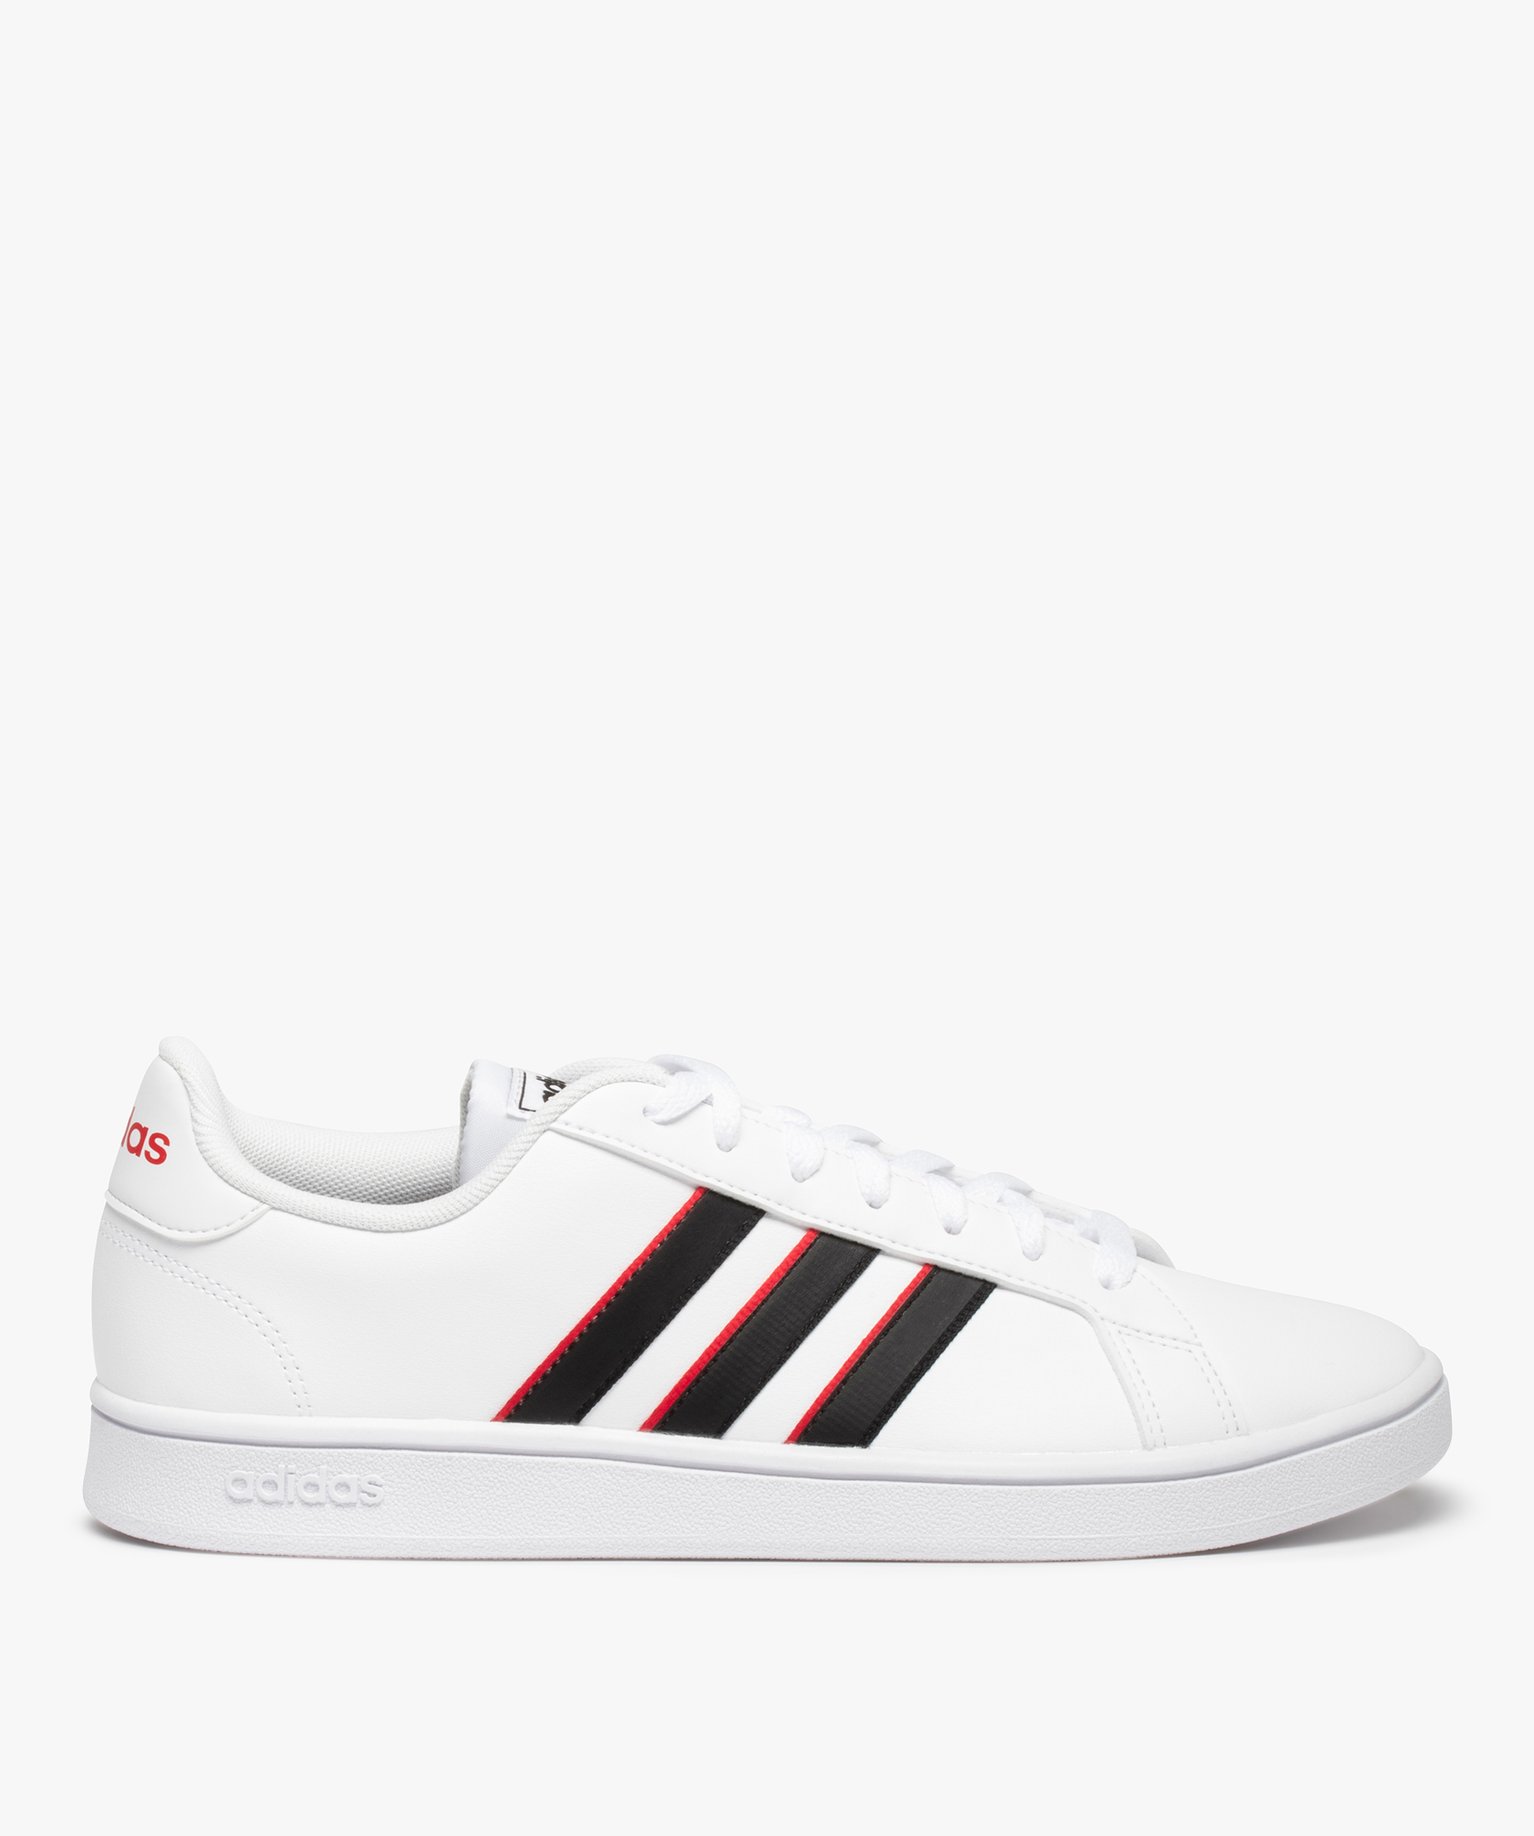 baskets homme a bandes colorees - adidas grand court base blanc